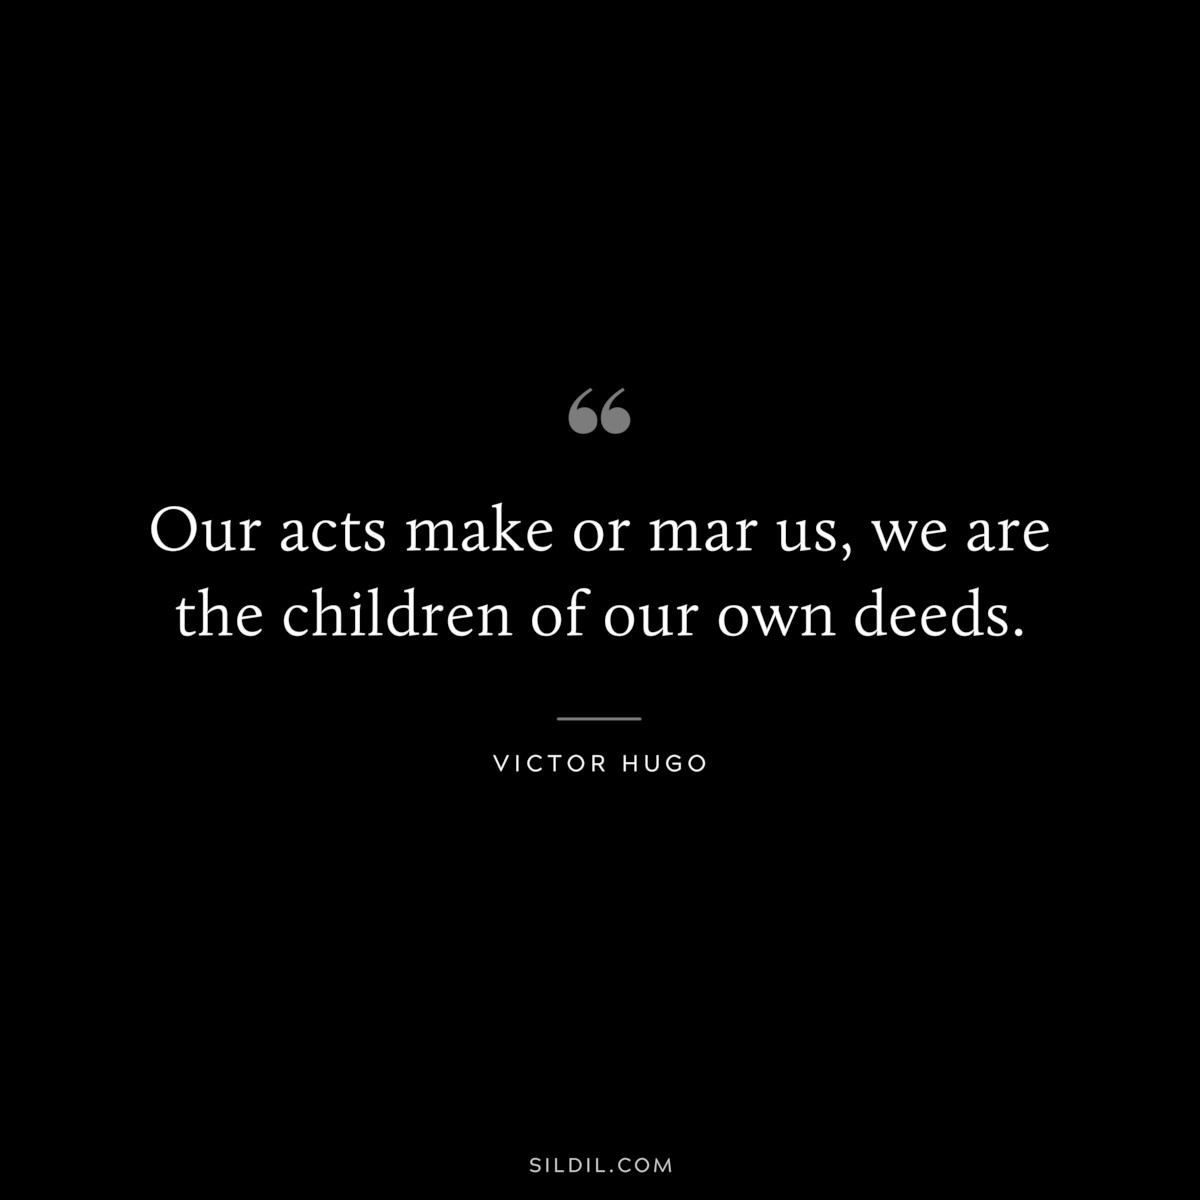 Our acts make or mar us, we are the children of our own deeds.― Victor Hugo